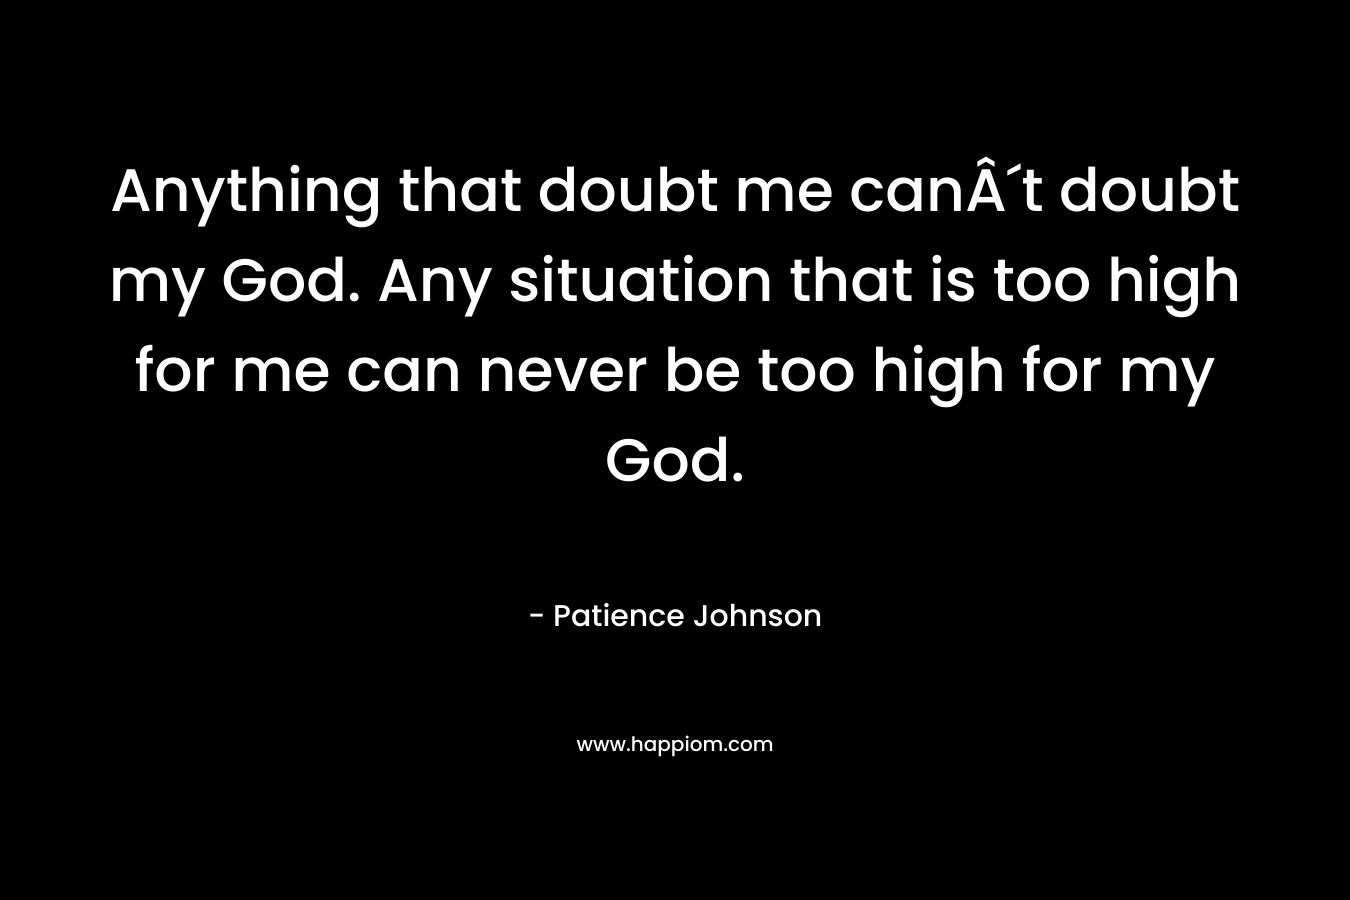 Anything that doubt me canÂ´t doubt my God. Any situation that is too high for me can never be too high for my God.